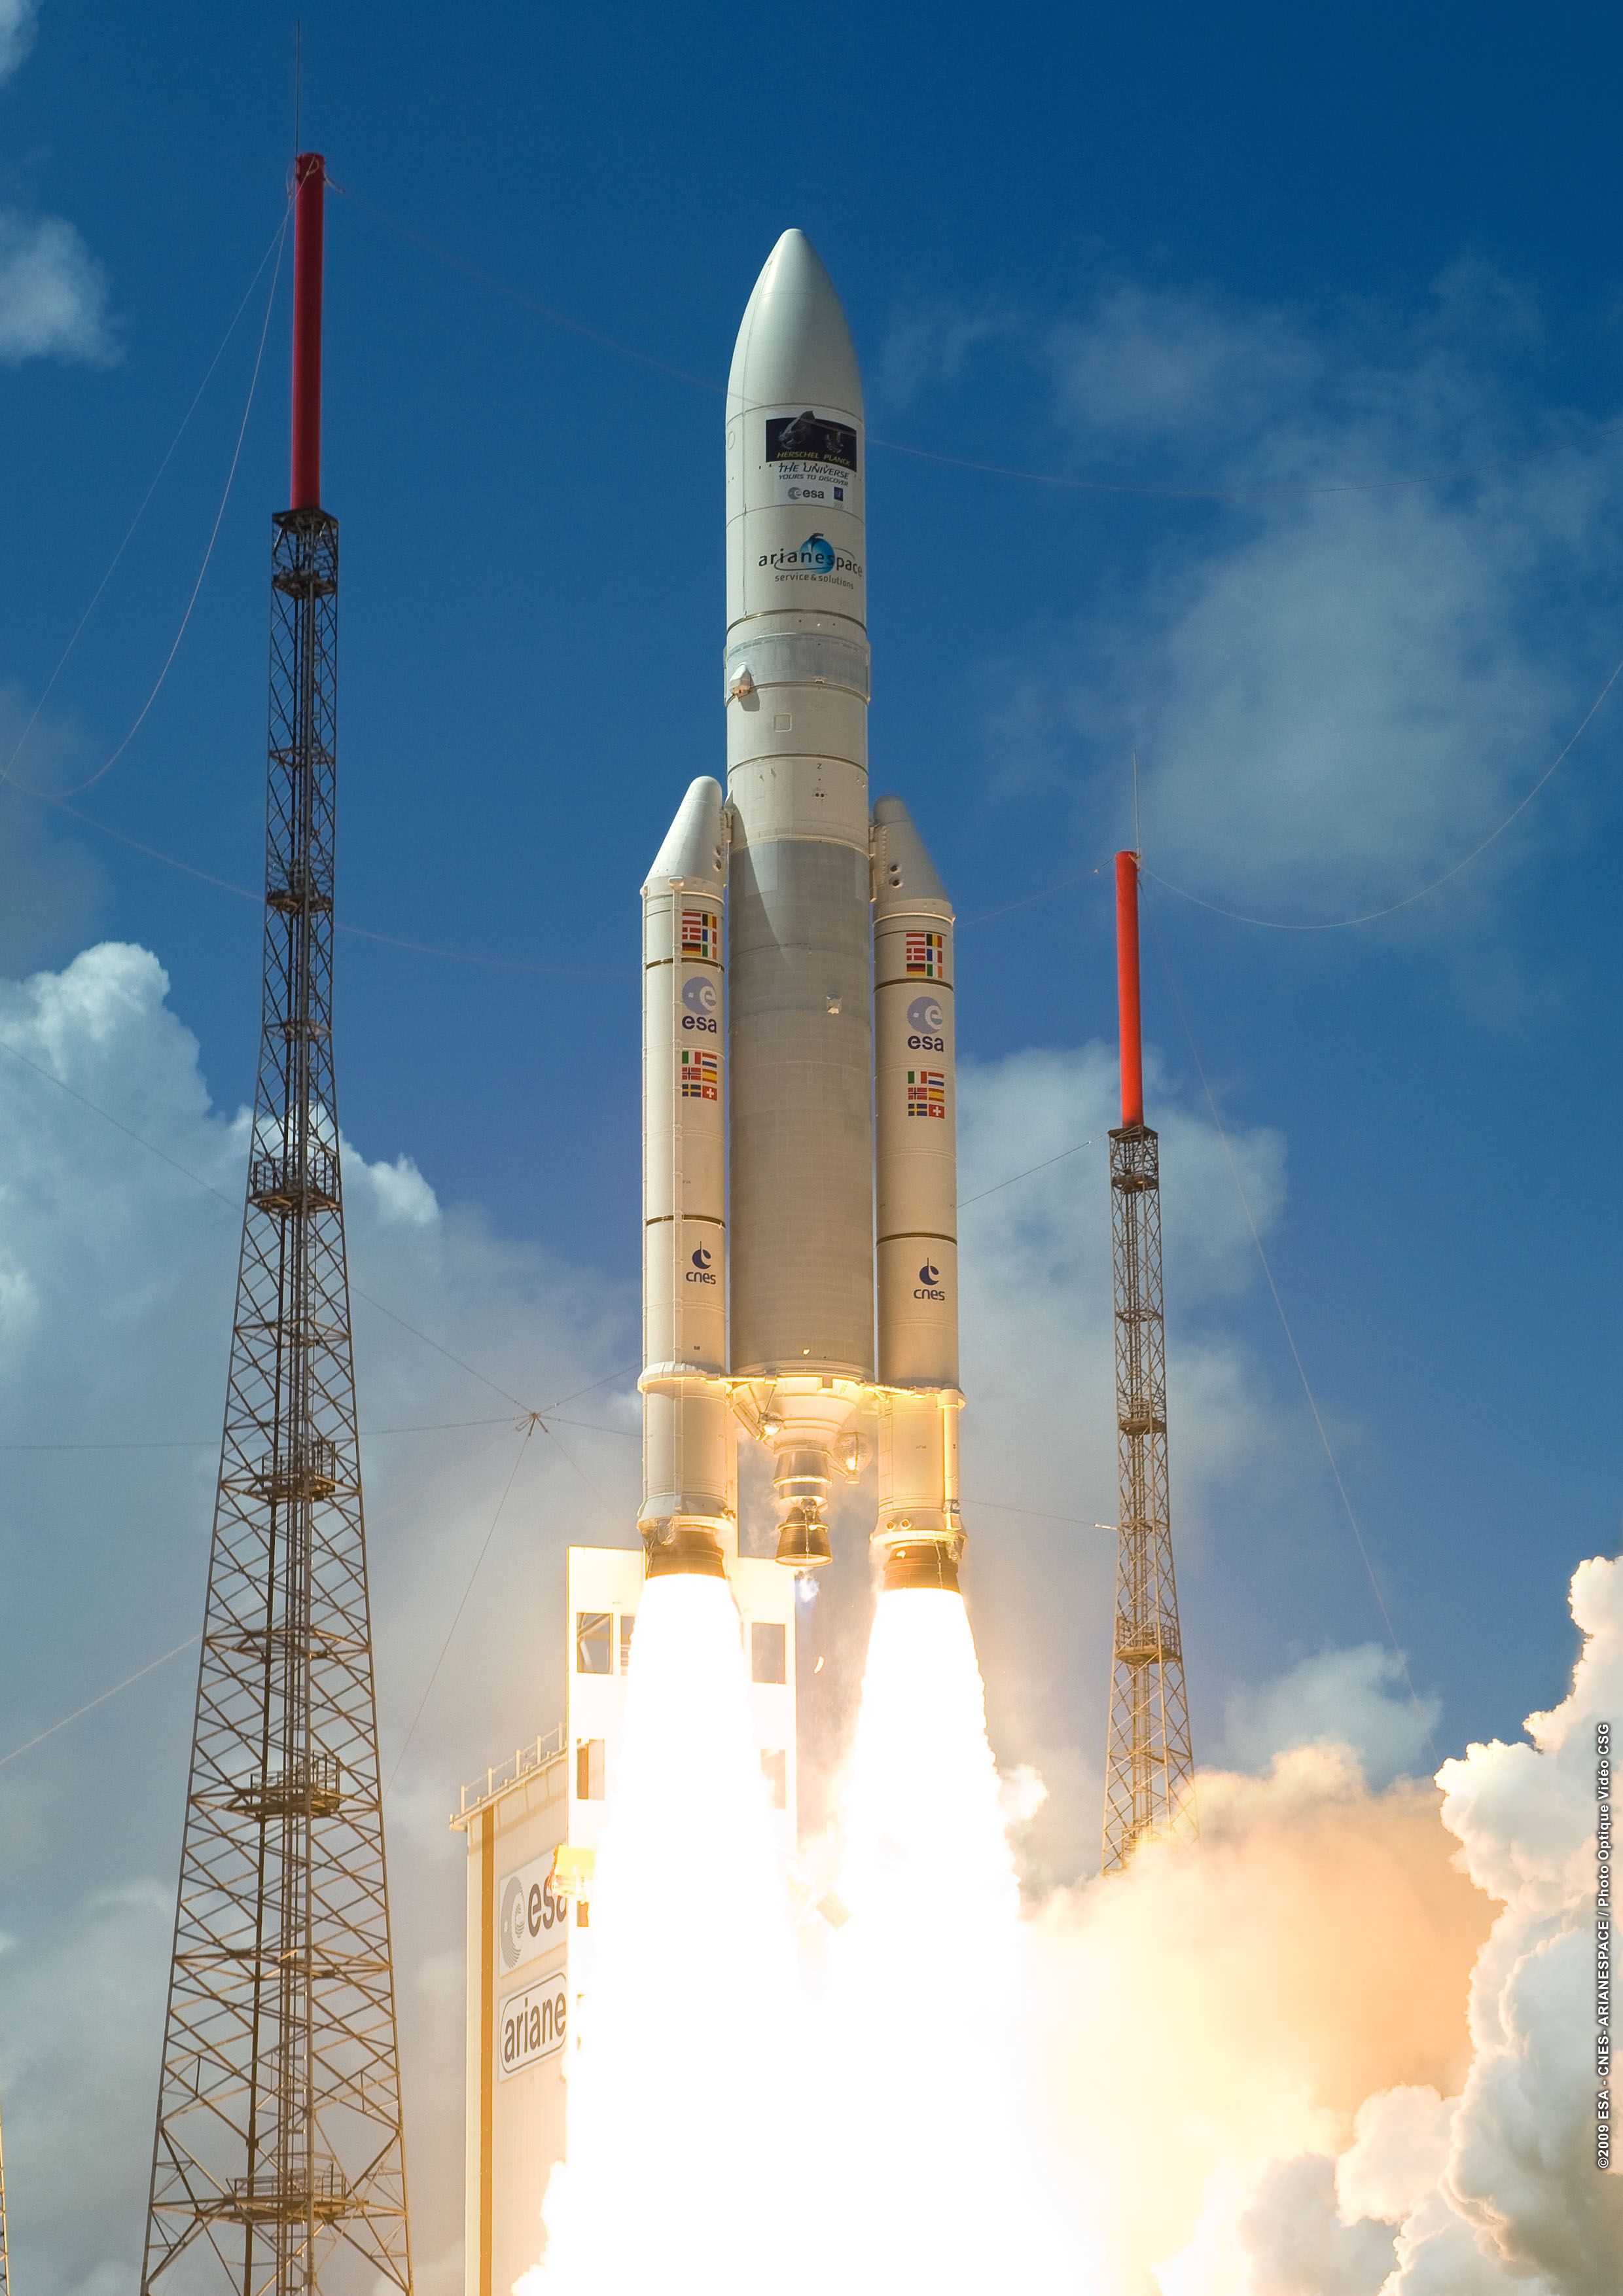 Launch of the Herschel-Planck mission on an Ariane 5-ECA at 13:12:02UT on 14 May 2009. The Herschel-Planck mission logo is clearly visible at the top of the fairing. The fine weather and clear blue sky contrasts sharply with the conditions for roll-out (), or those prevalent only a few hours before launch as the VIPs were taken to the launch viewing area in heavy rain during an intense storm.